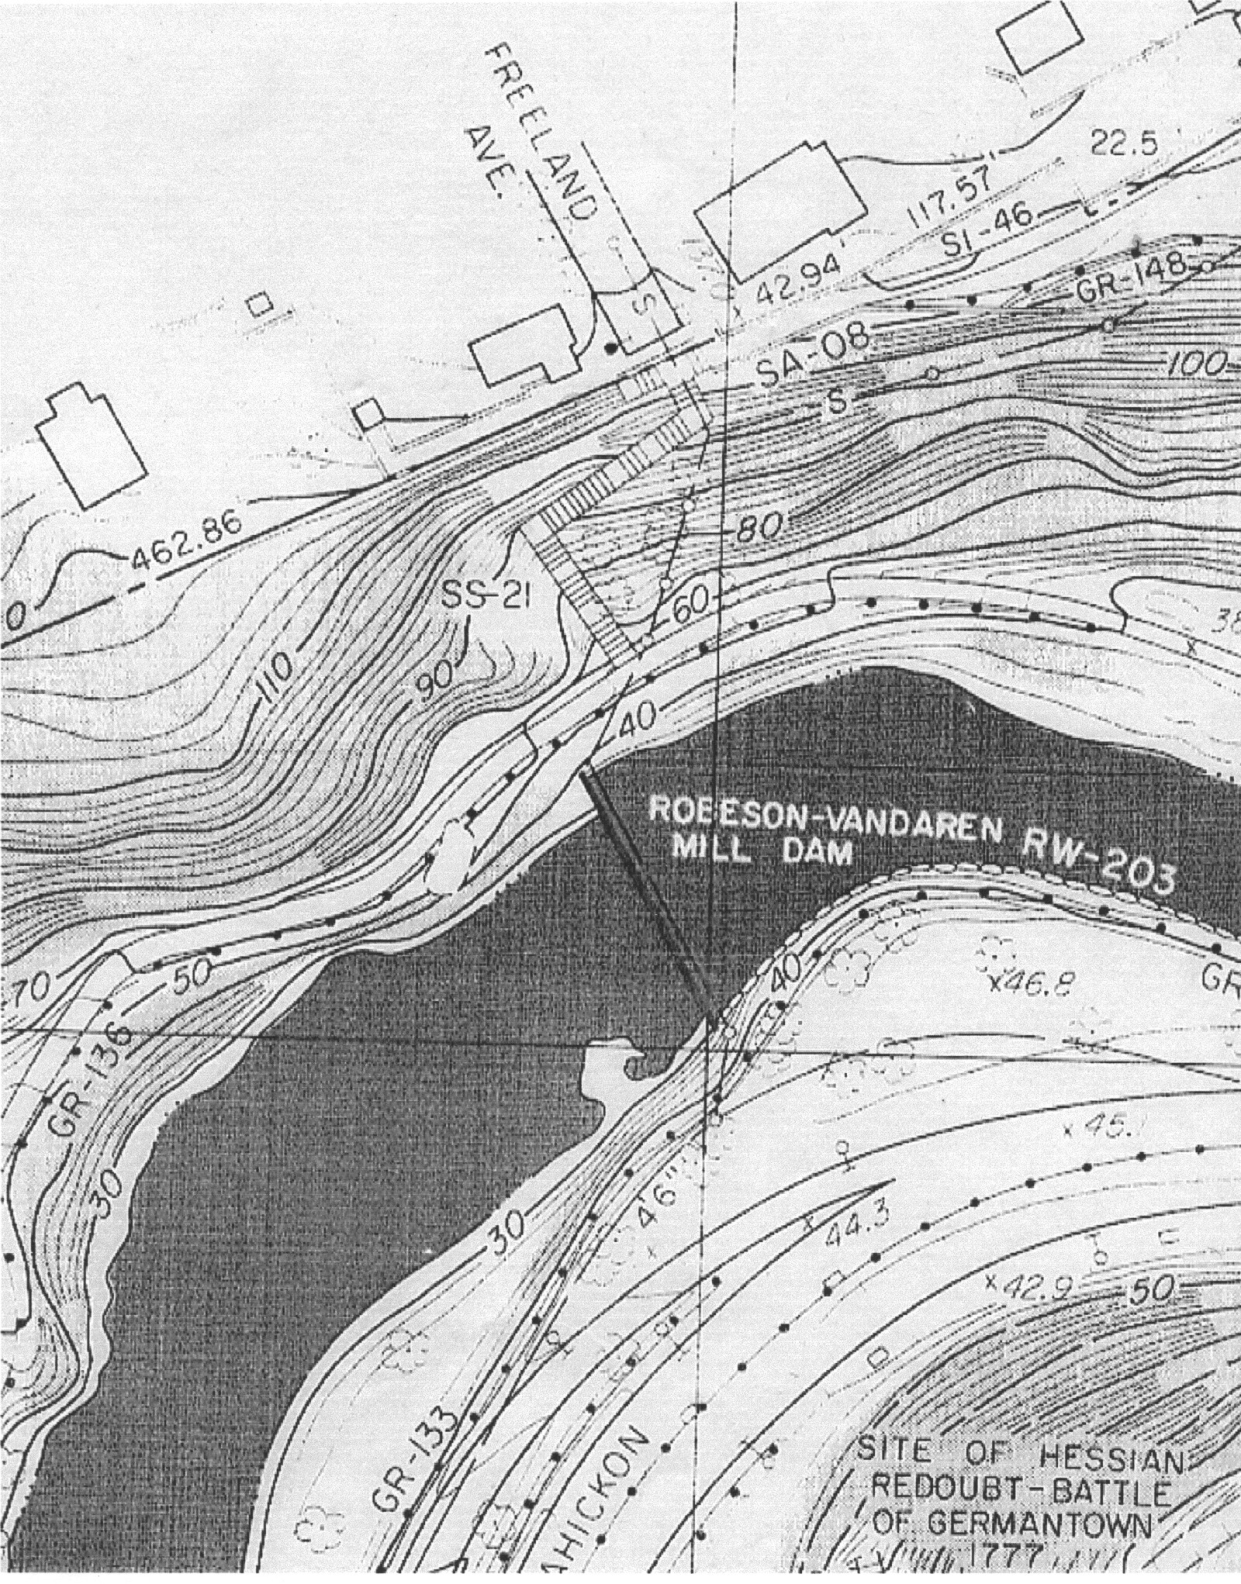 This is a detail from what appears to be a surveyor's map of the dam in front of the Hundred Steps. Who knew it was named the Robeson-Vandaren Mill Dam? Note the site of the Hessian Redoubt from the 1777 Battle of Germantown.